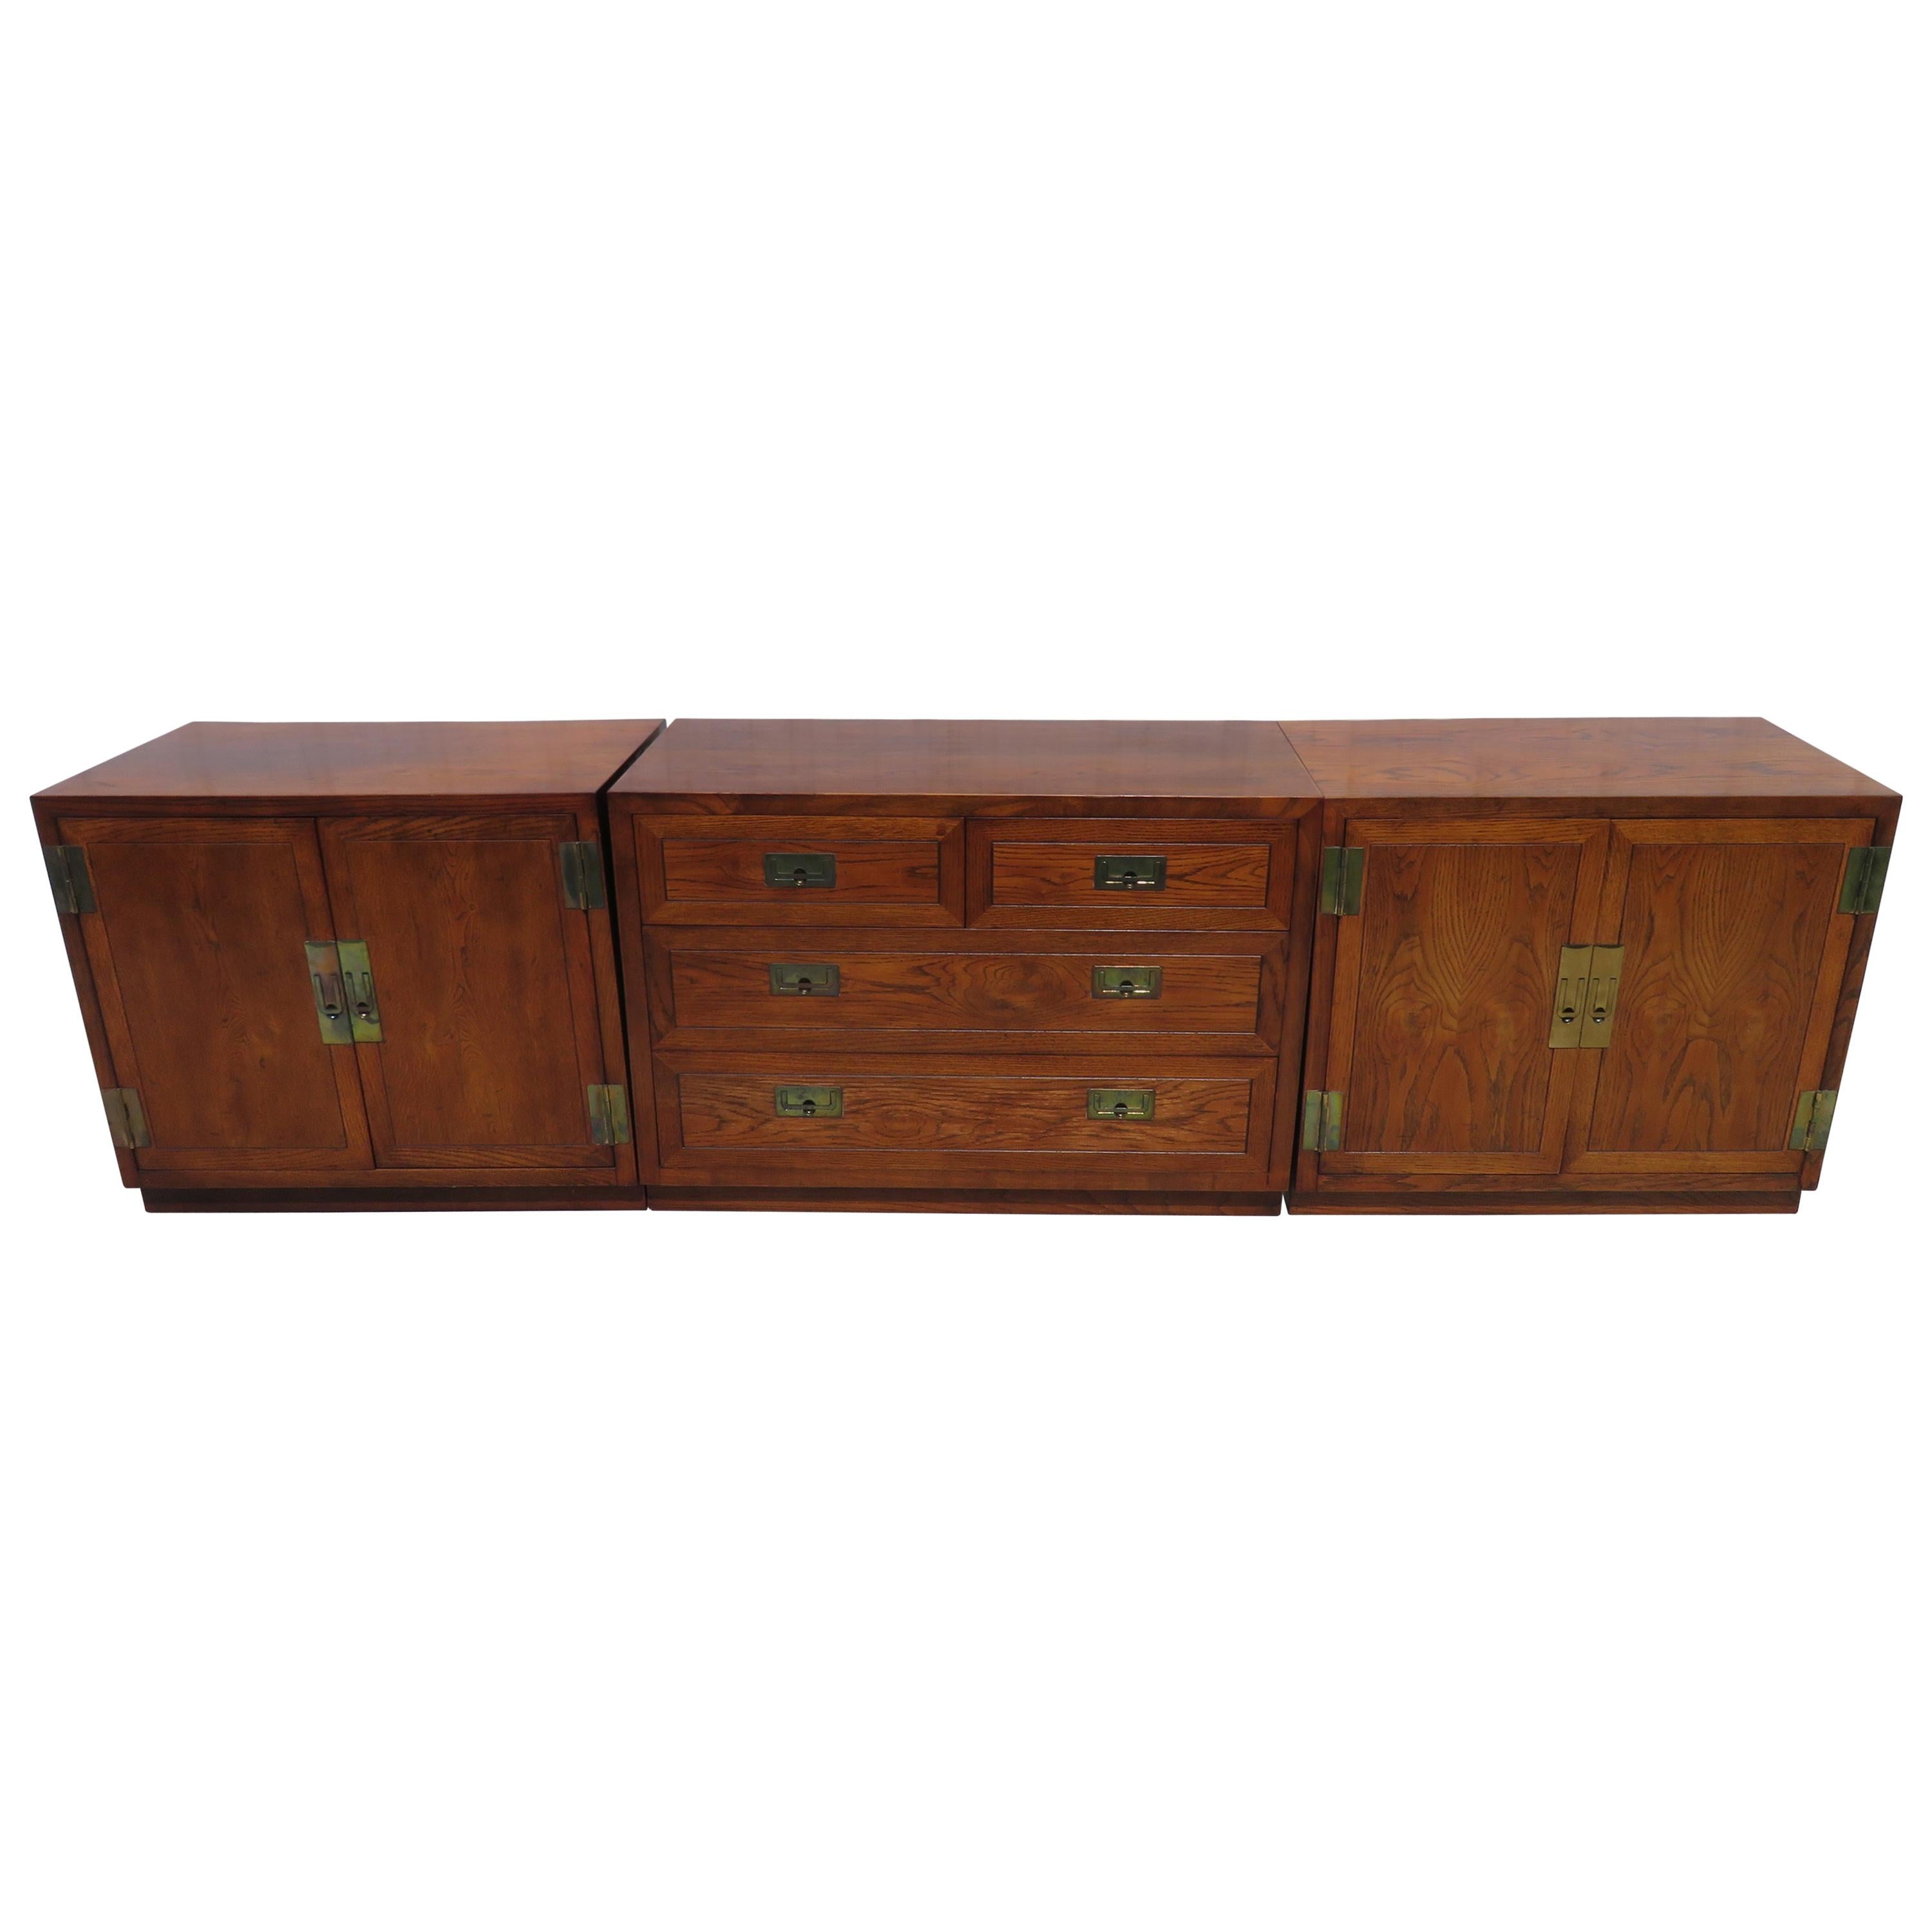 3 Outstanding Henredon Campaign Chest Cabinet Credenza Mid-Century Modern